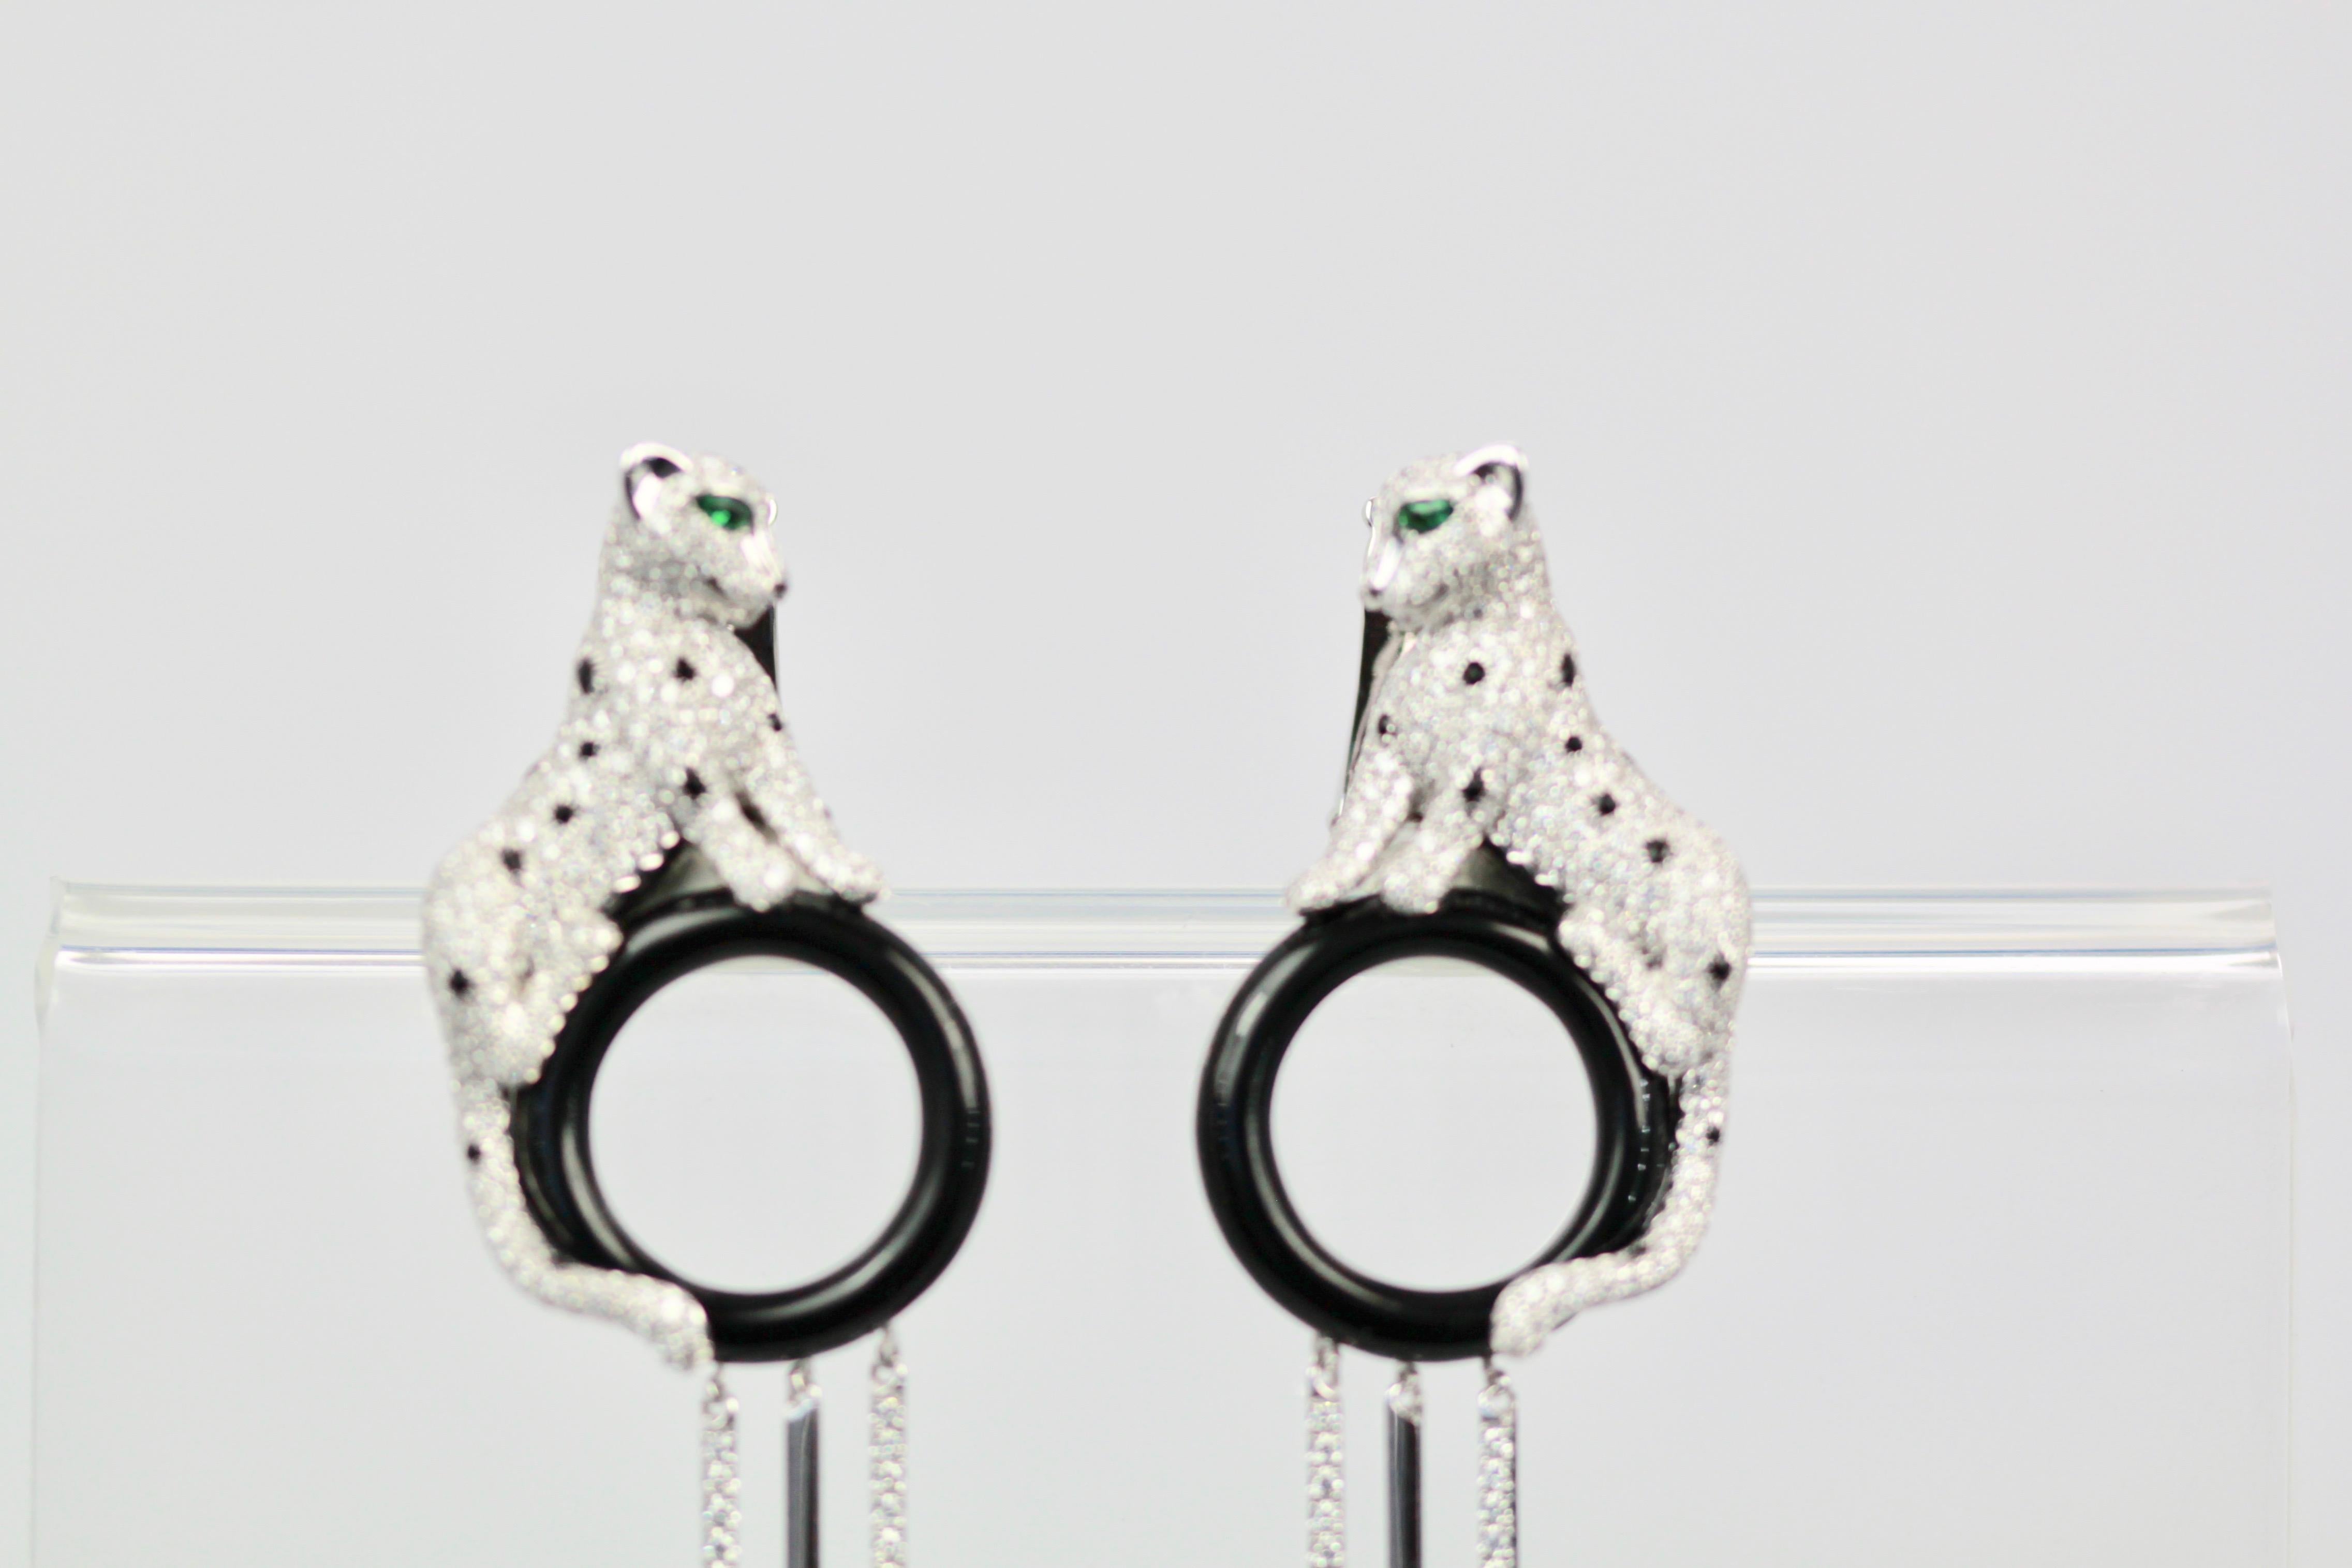 Cartier Diamond Panthere Earrings with Onyx and Emeralds 18K 1